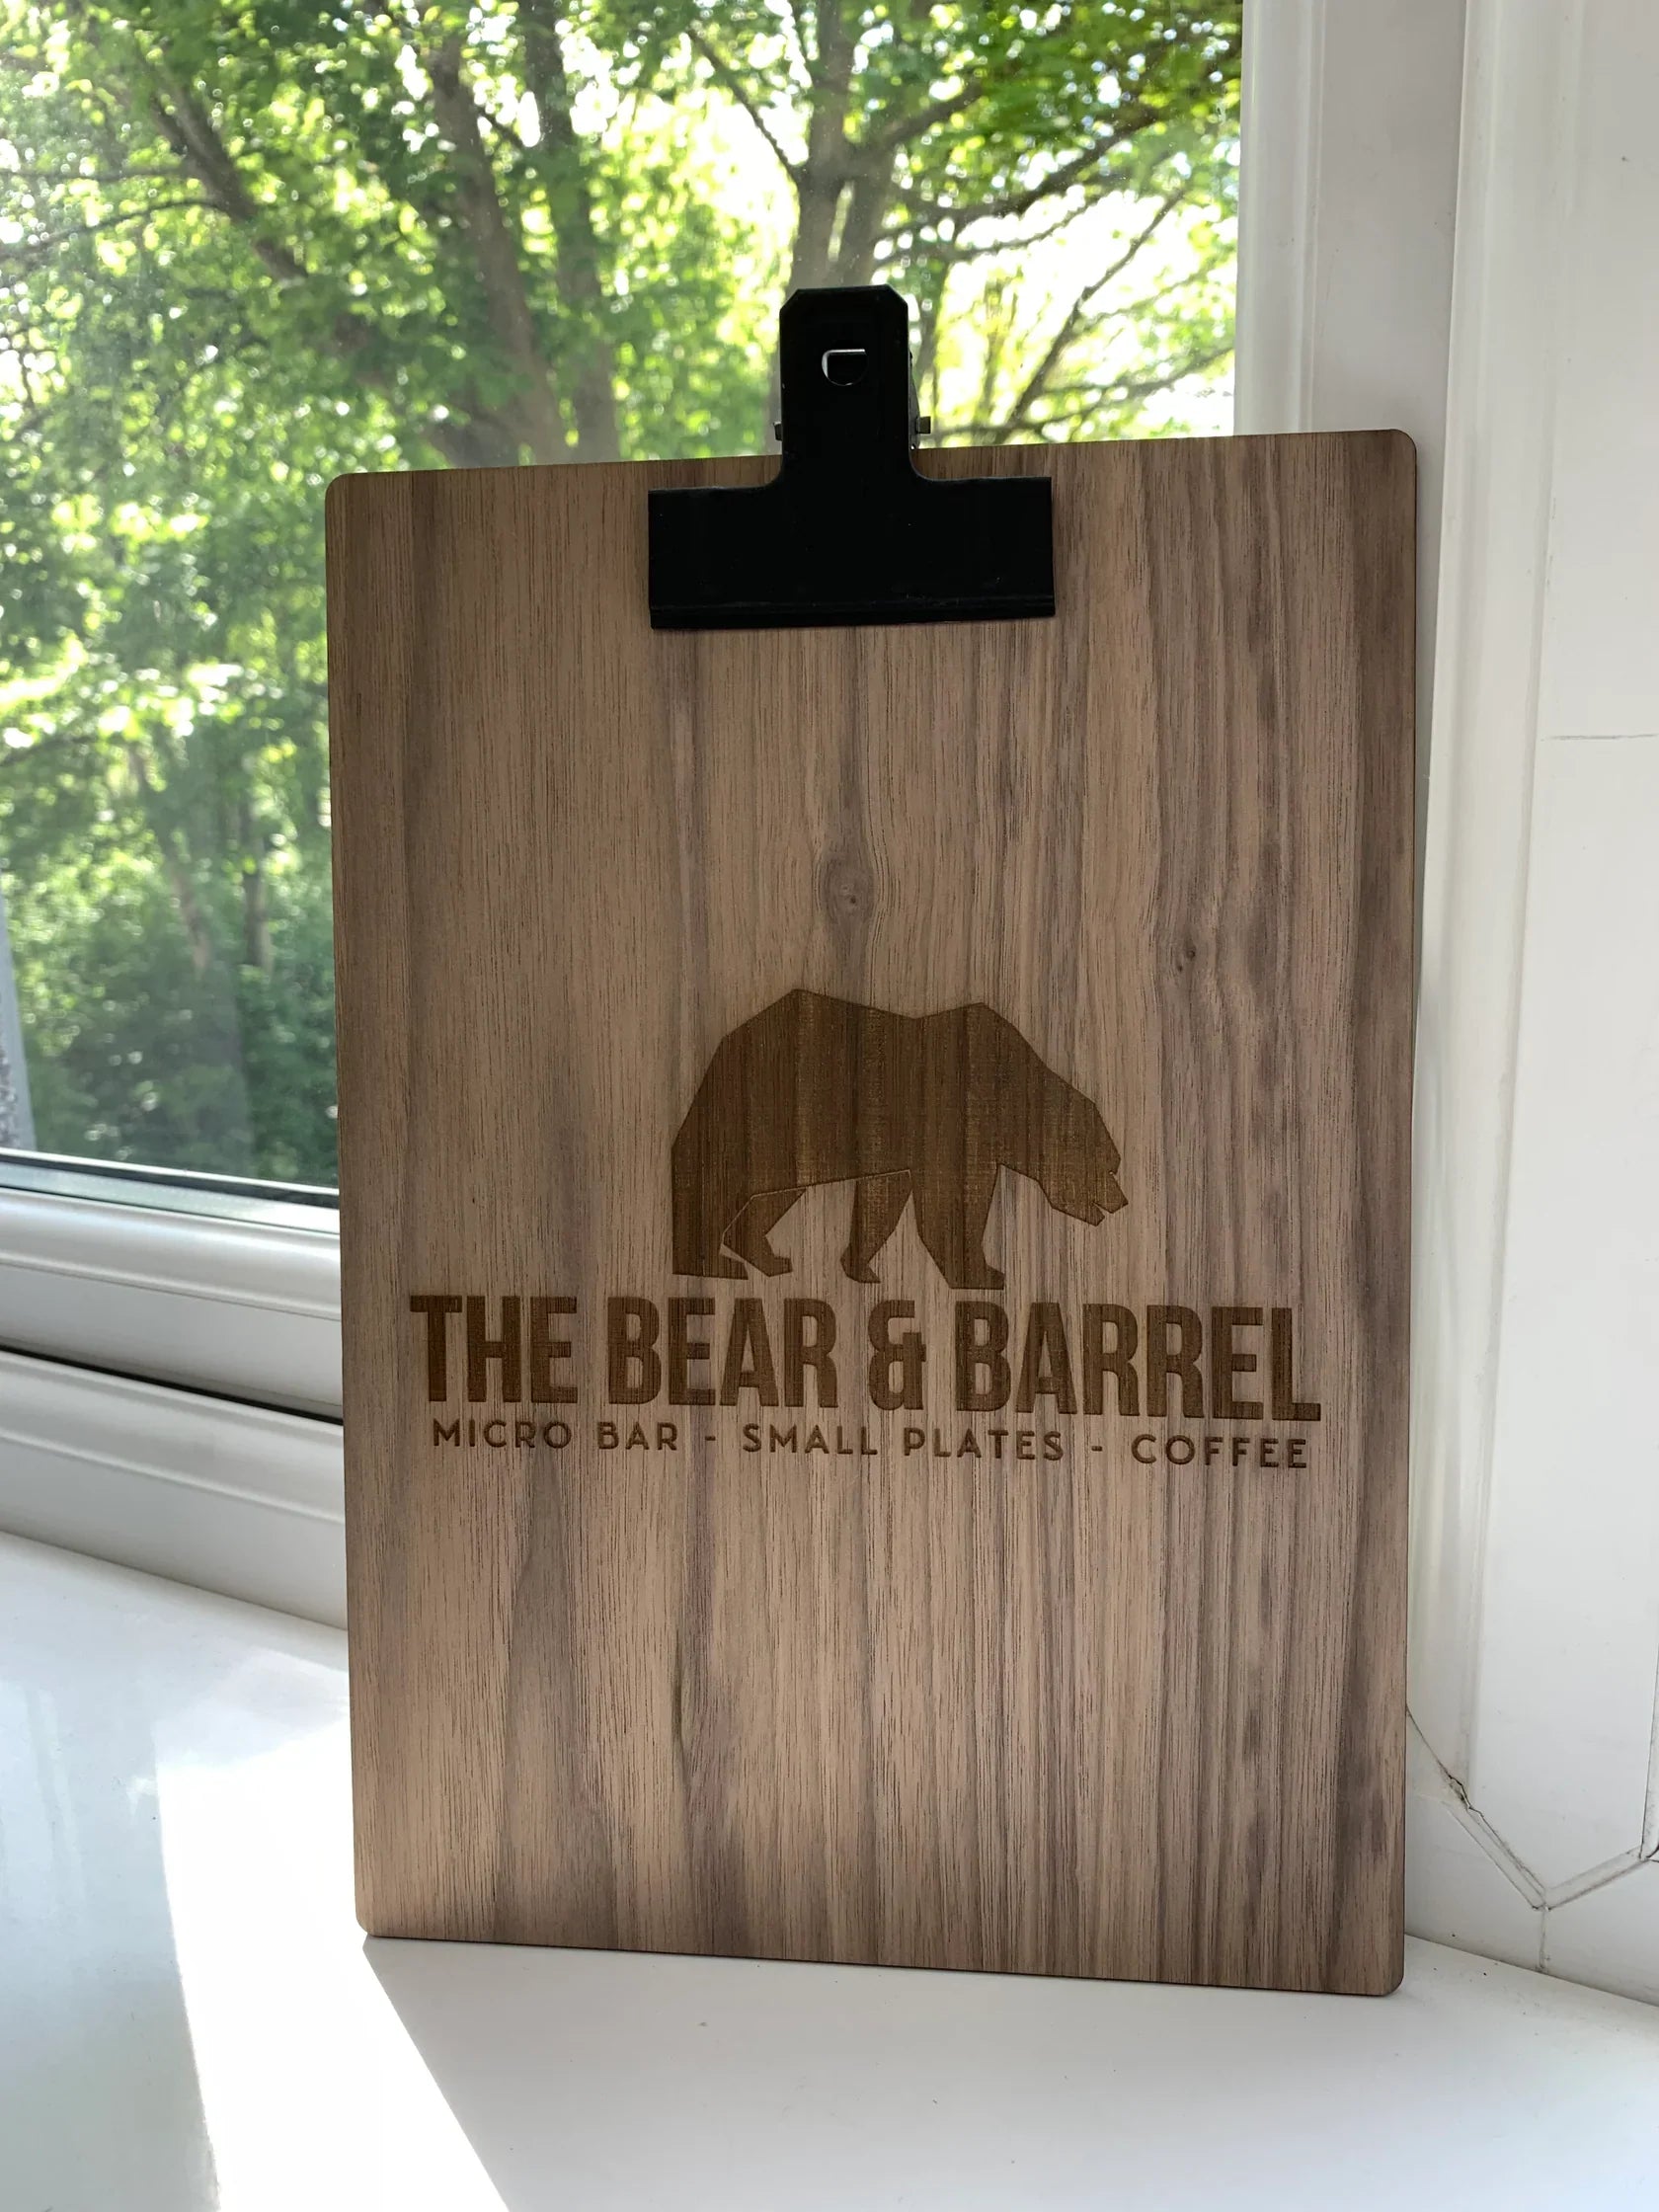 Branded Wooden Clipboard With Black Removable Clip (Sanded, Oiled and Waxed)